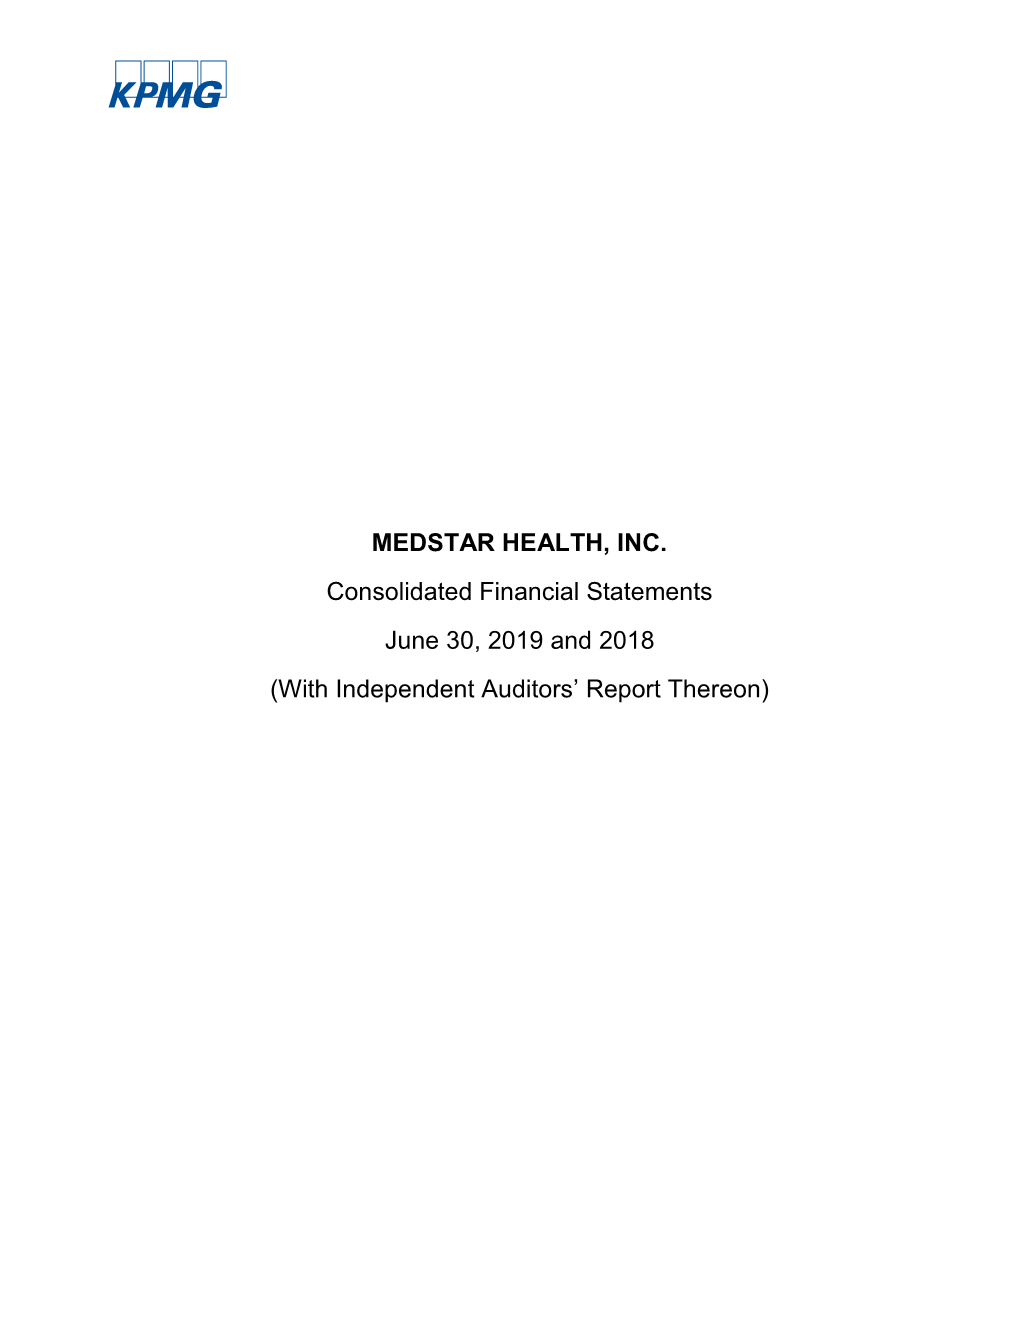 MEDSTAR HEALTH, INC. Consolidated Financial Statements June 30, 2019 and 2018 (With Independent Auditors’ Report Thereon)